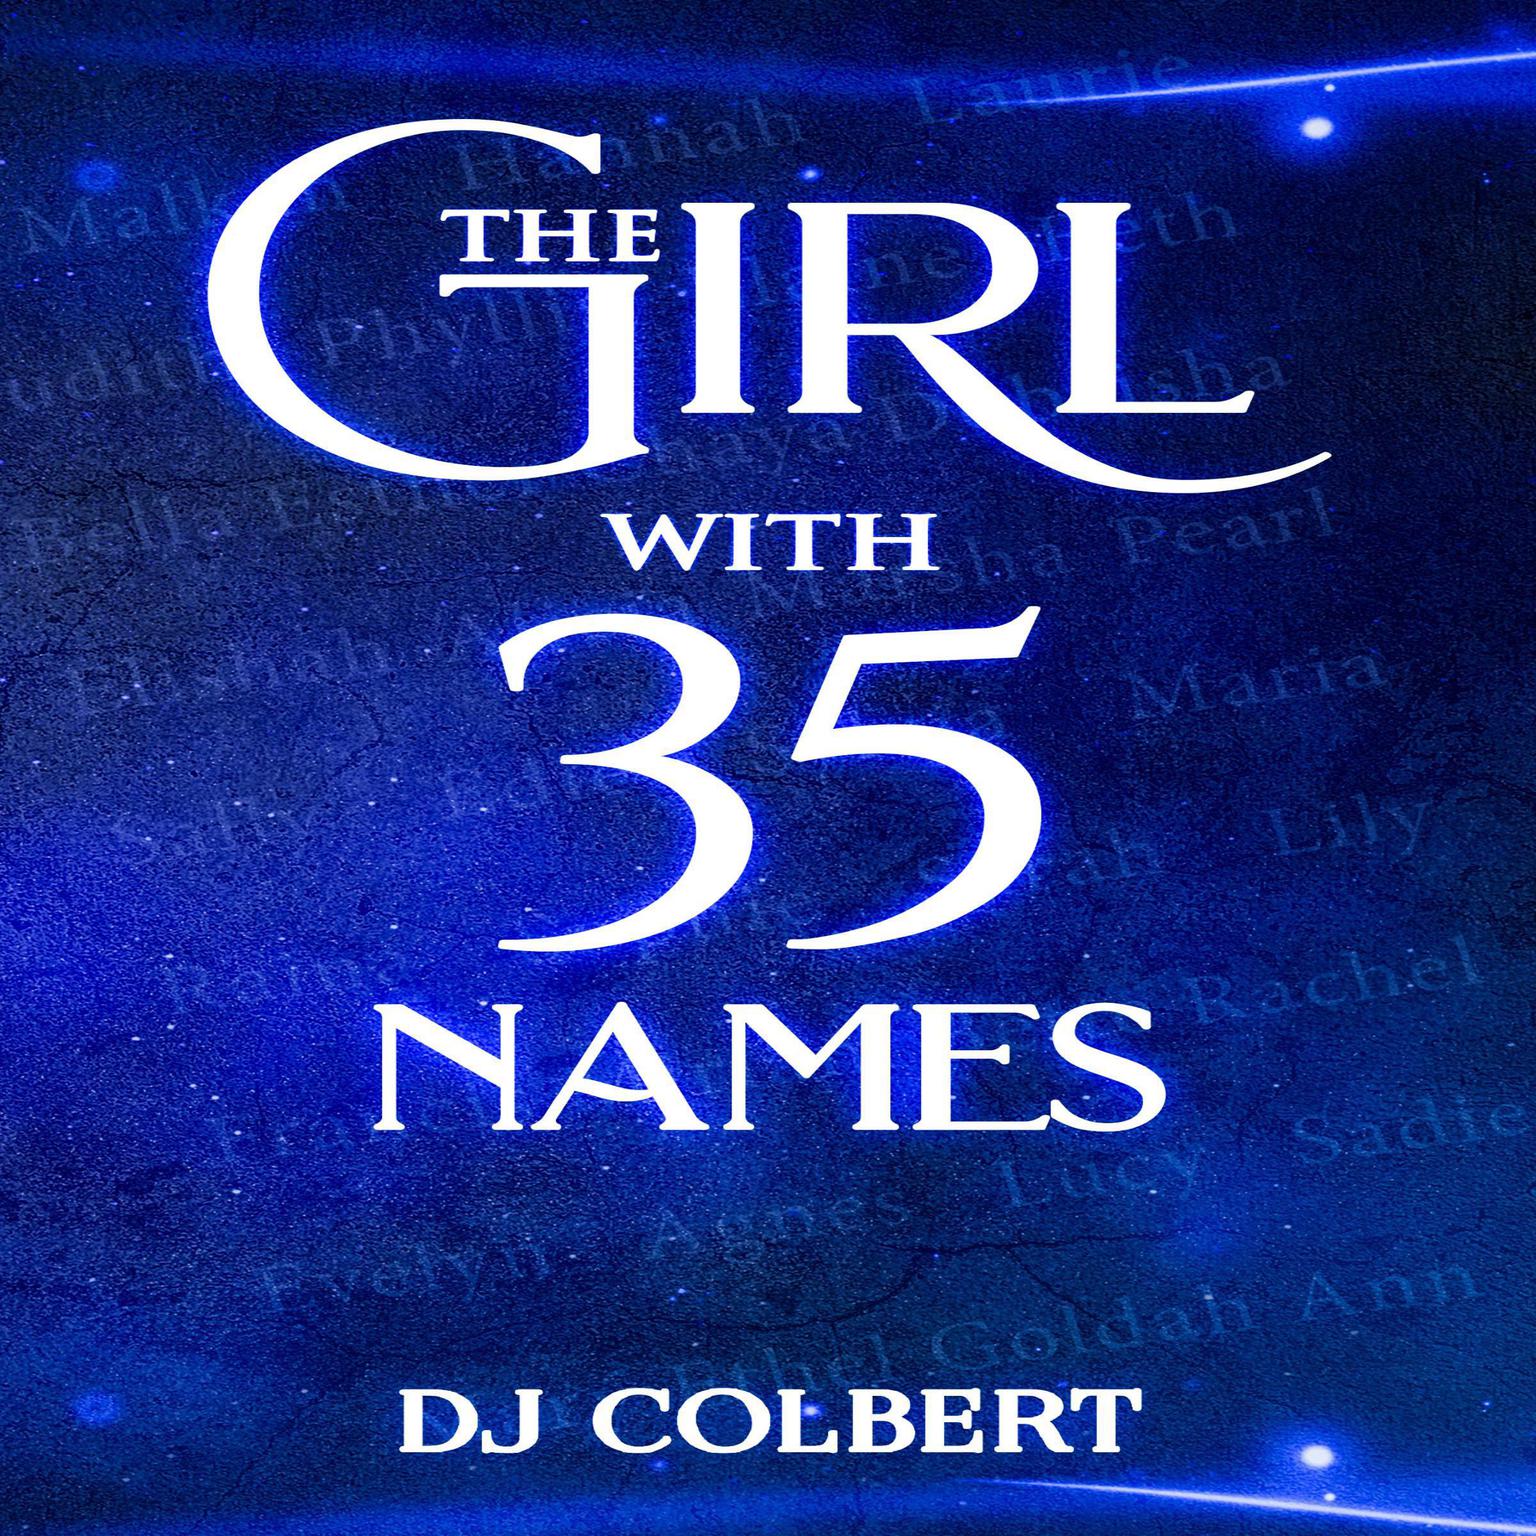 The Girl with 35 Names Audiobook, by DJ Colbert